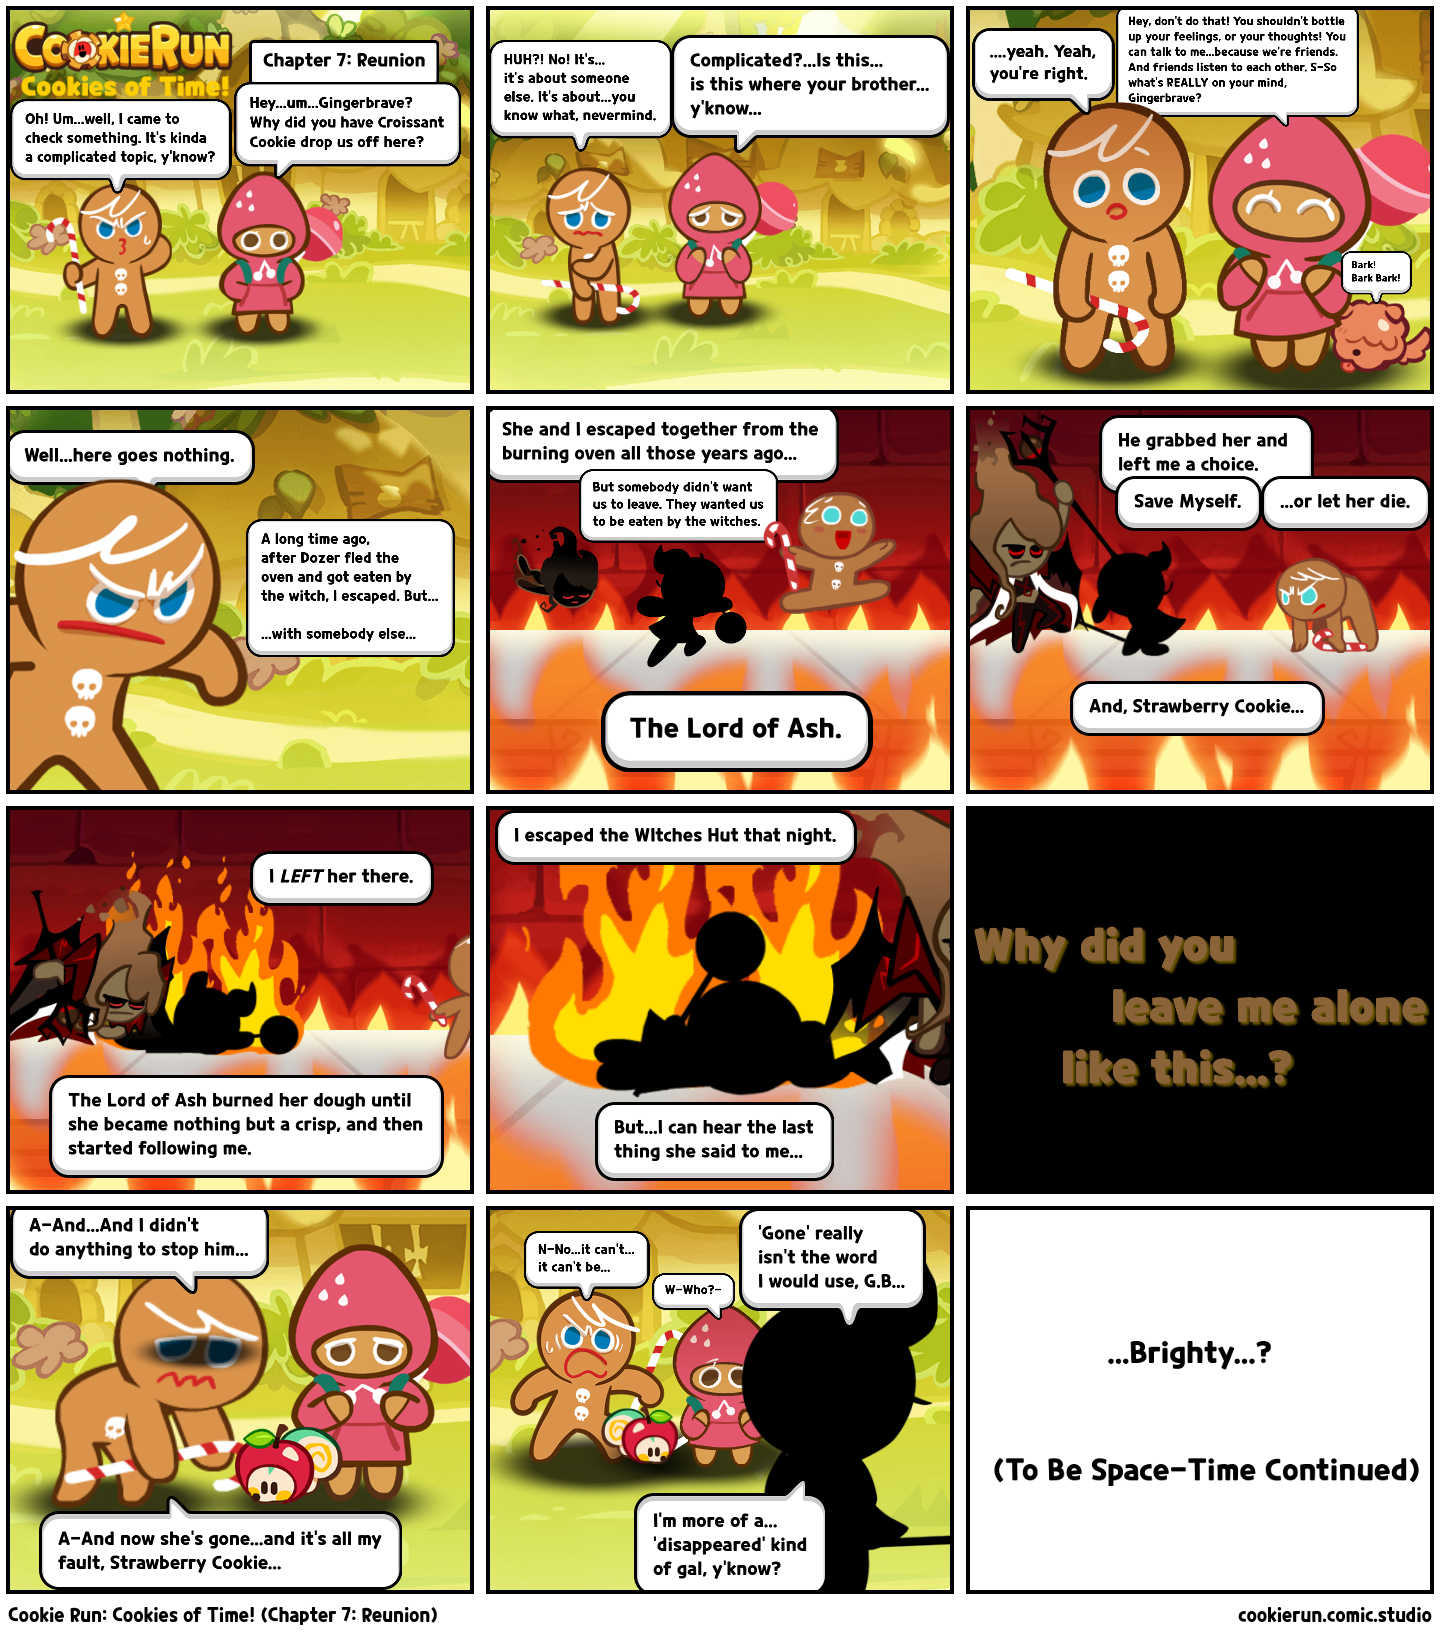 Cookie Run: Cookies of Time! (Chapter 7: Reunion)